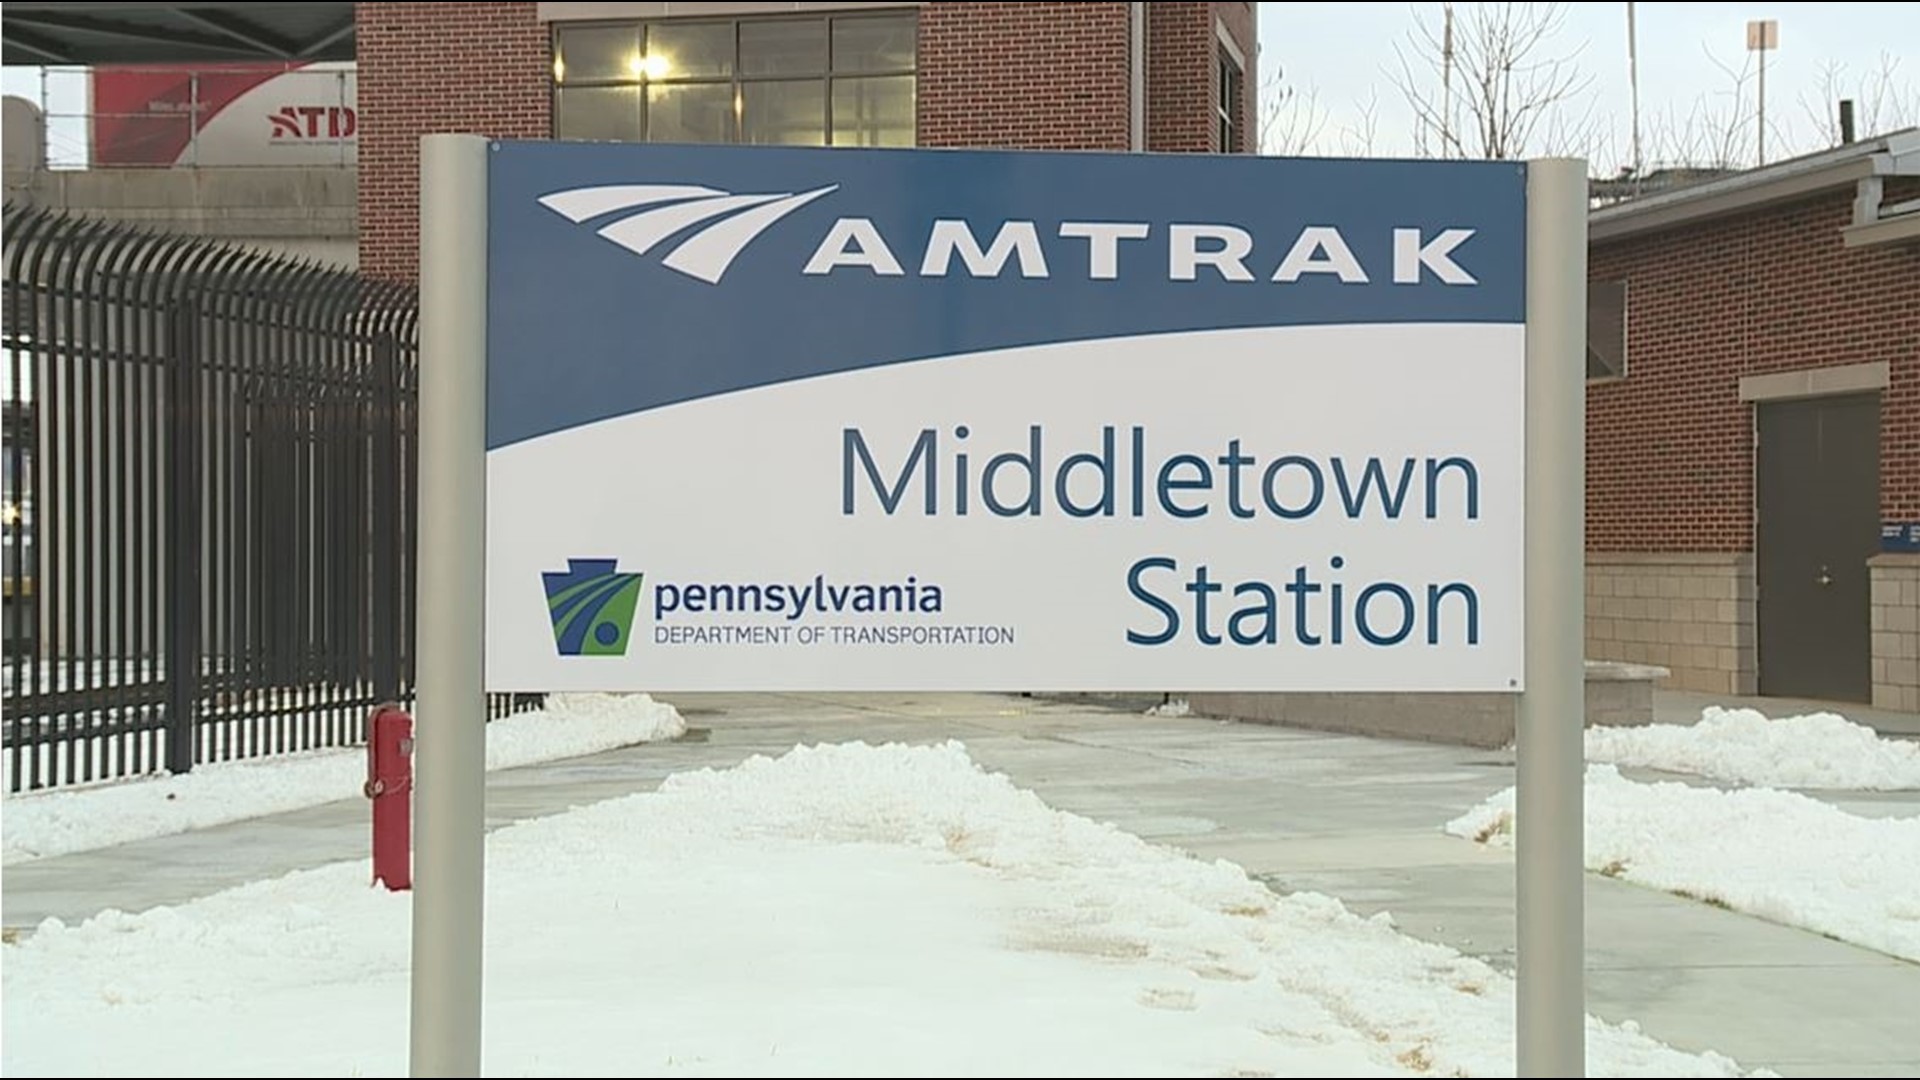 The $24.5 million station, located at West Emaus and Main streets in Middletown, officially opened on Jan. 10.